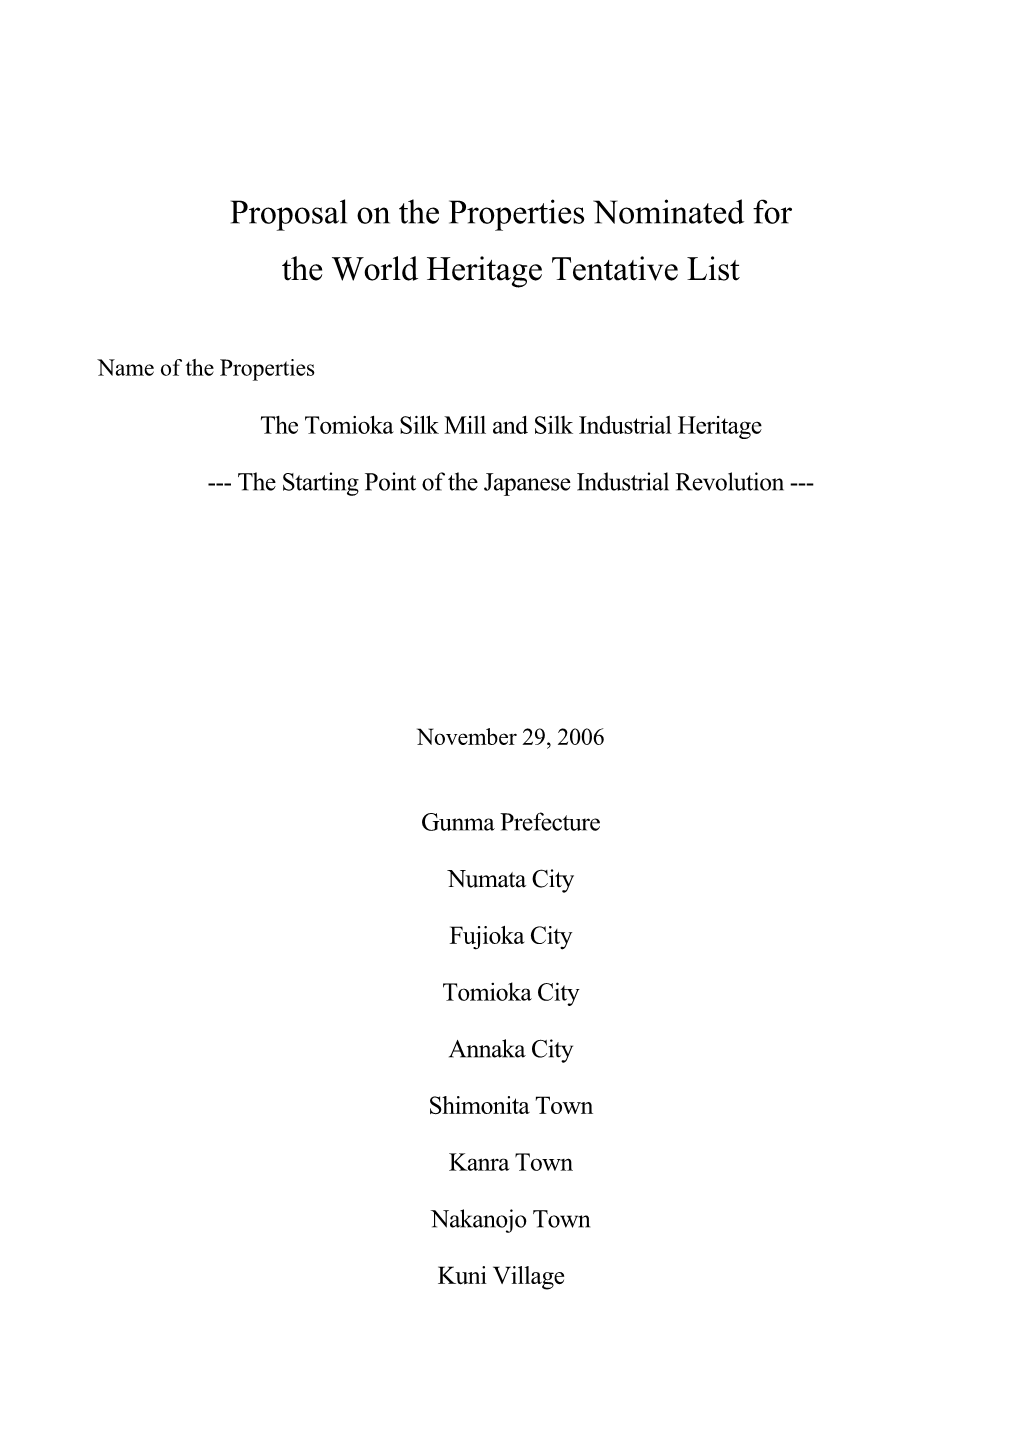 Proposal on the Properties Nominated for the World Heritage Tentative List